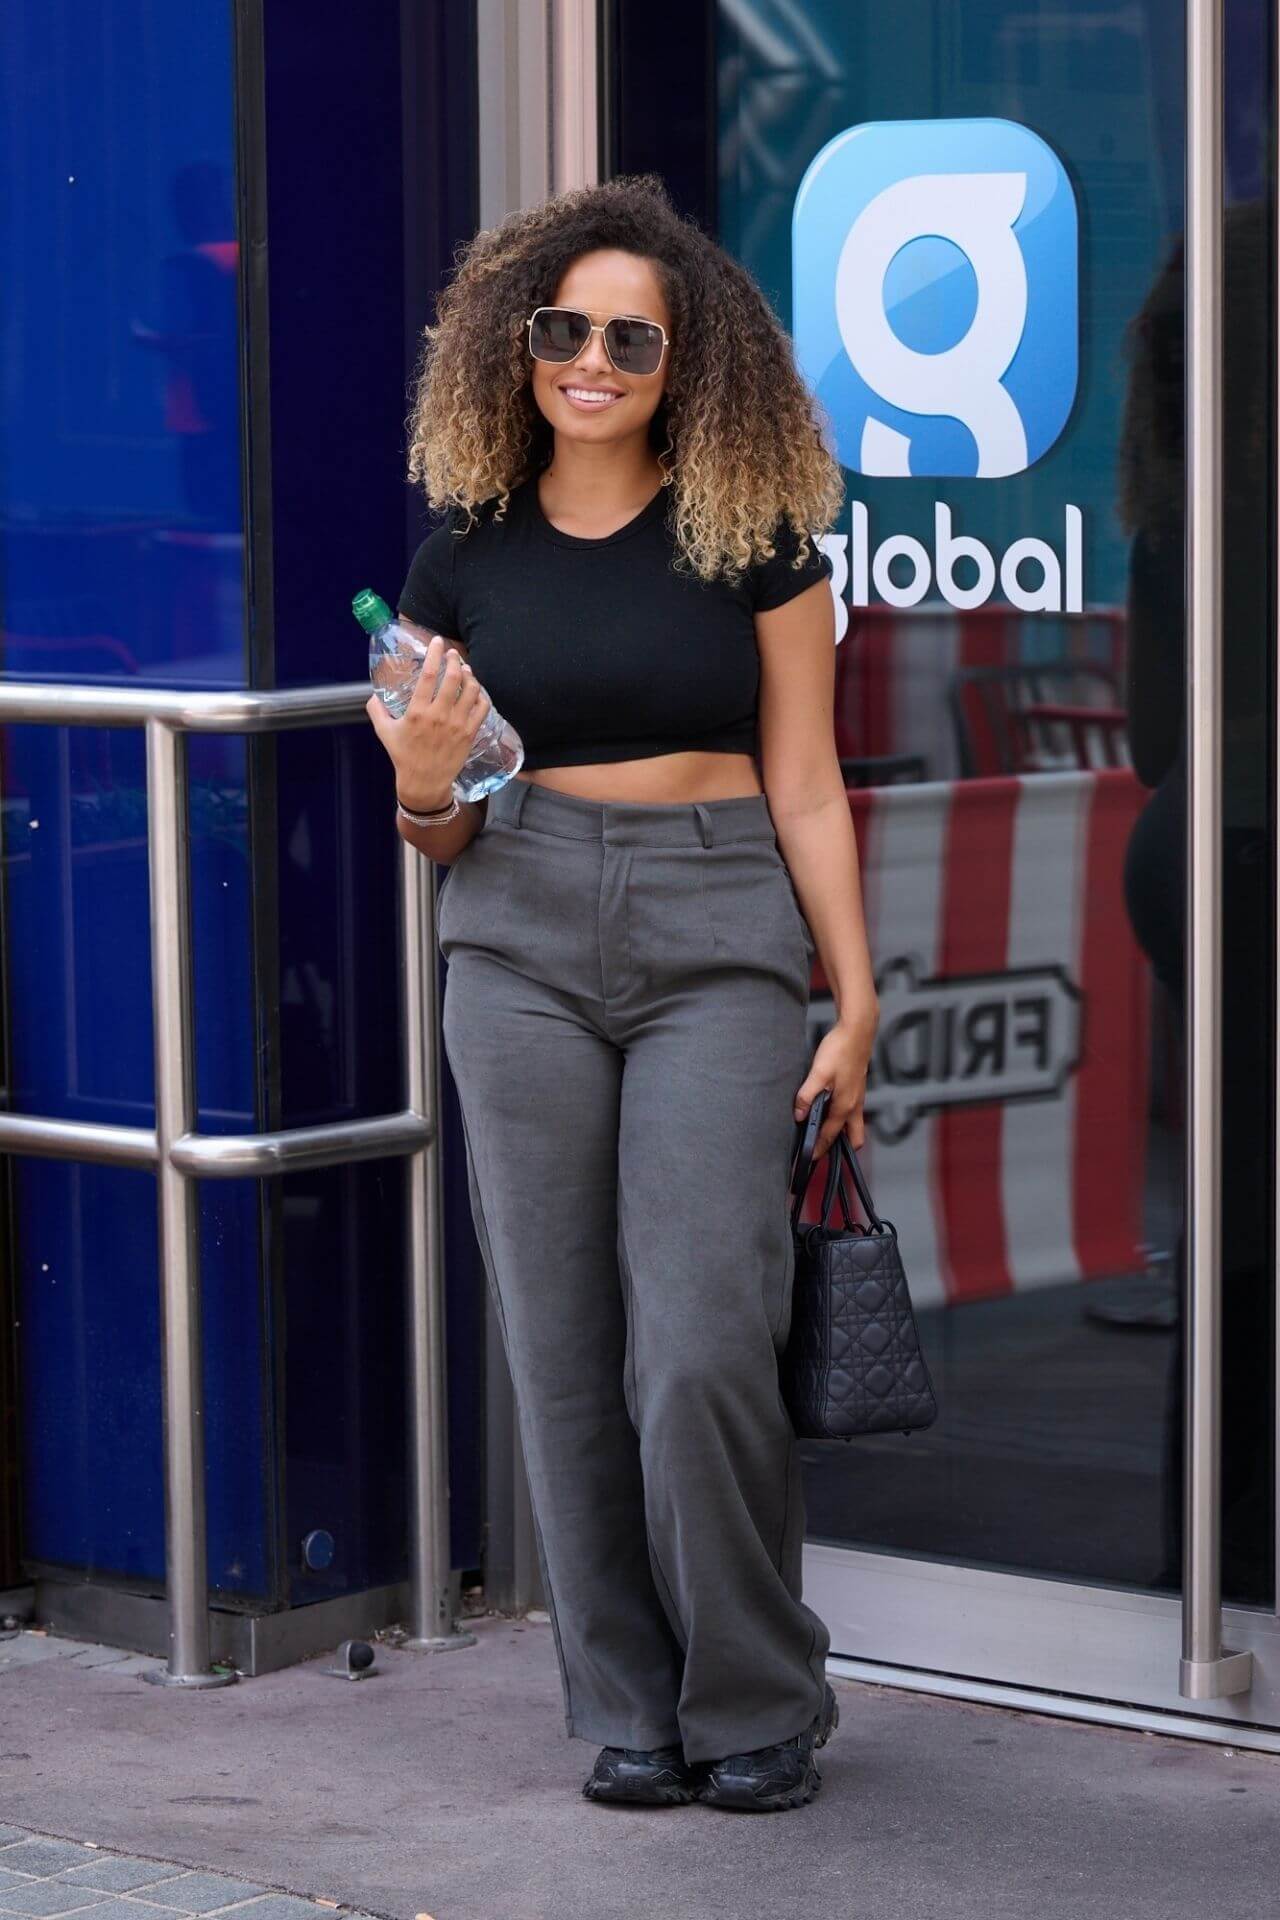 Amber Gill In Black Crop Top With Grey Pants Out in London